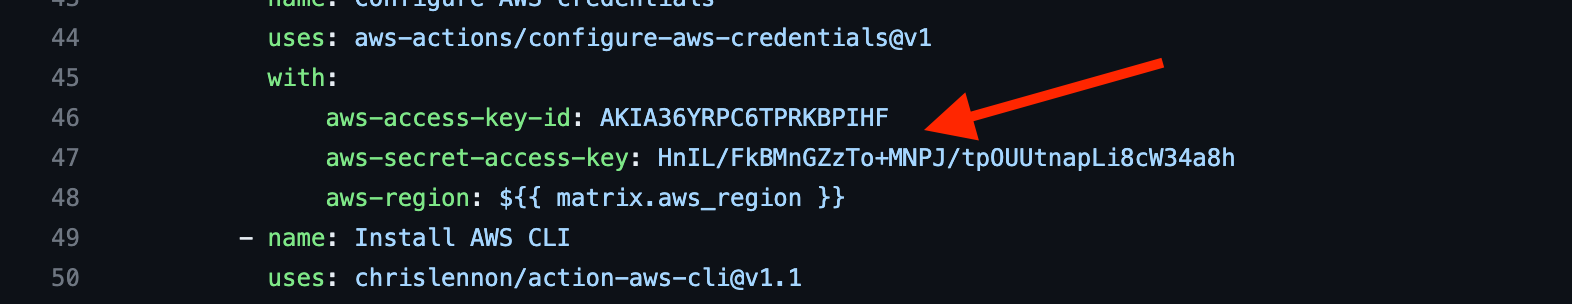 Example of a leaked AWS key within a public git repository from Sumo Logic 